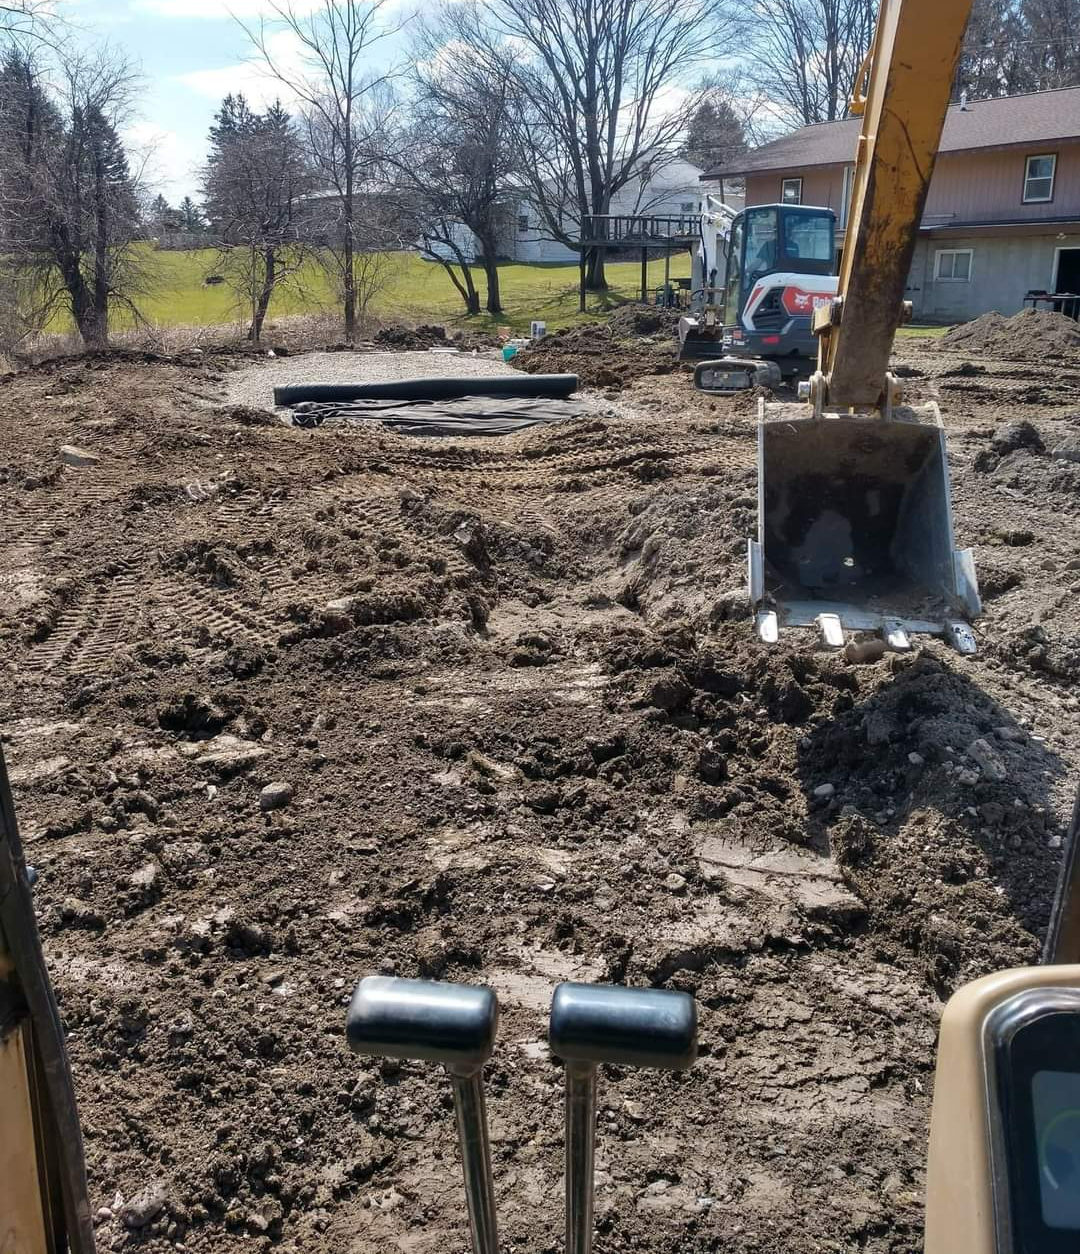 a bulldozer is digging a hole in a dirt field